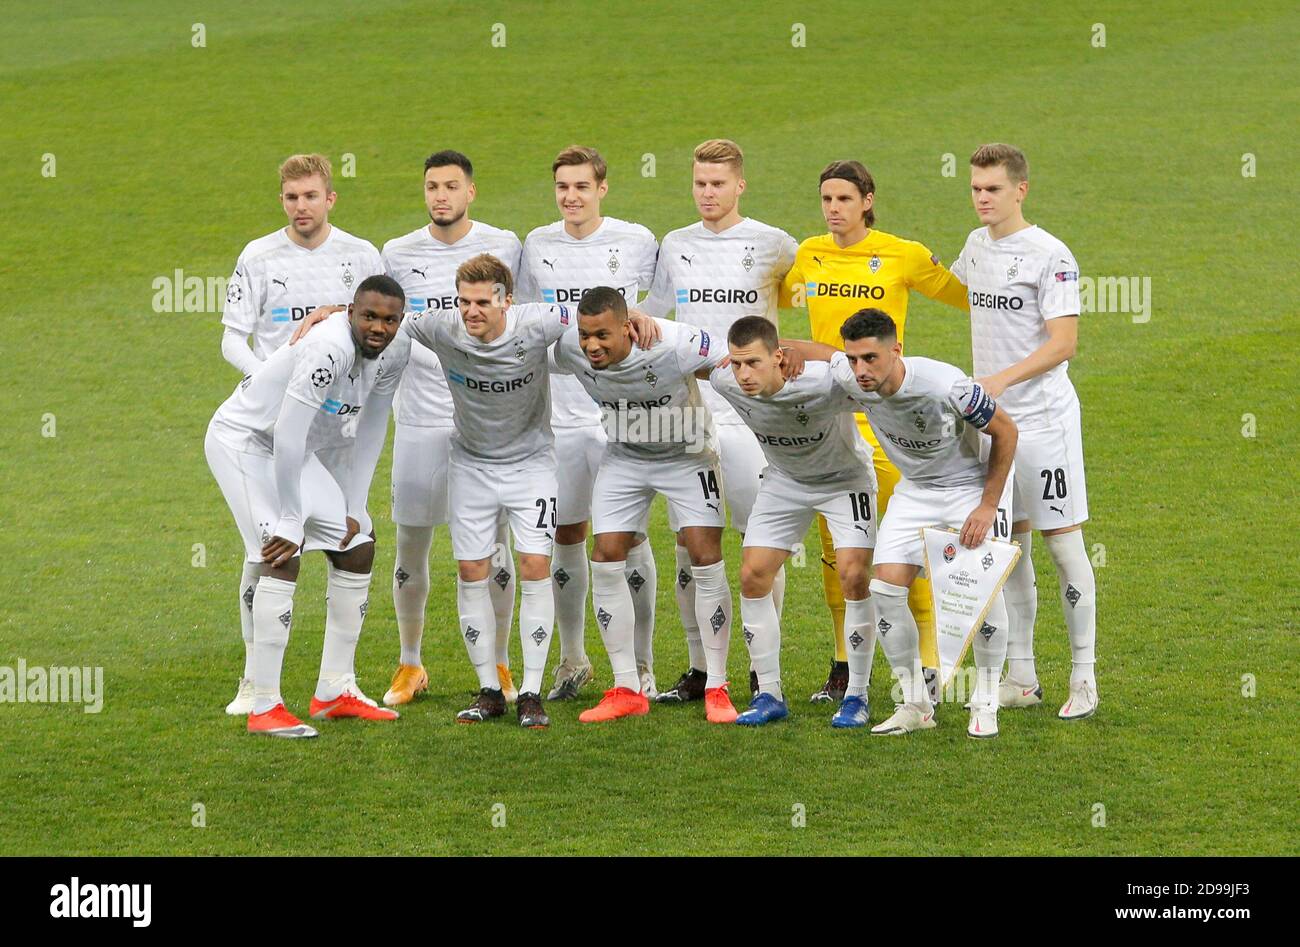 Players of Borussia Monchengladbach poses for photo before the UEFA Champions League group B football match between Shakhtar Donetsk and Borussia Monchengladbach at the Olimpiyskiy stadium.(Final score: Shakhtar Donetsk  0-6 borussia mönchengladbach) Stock Photo